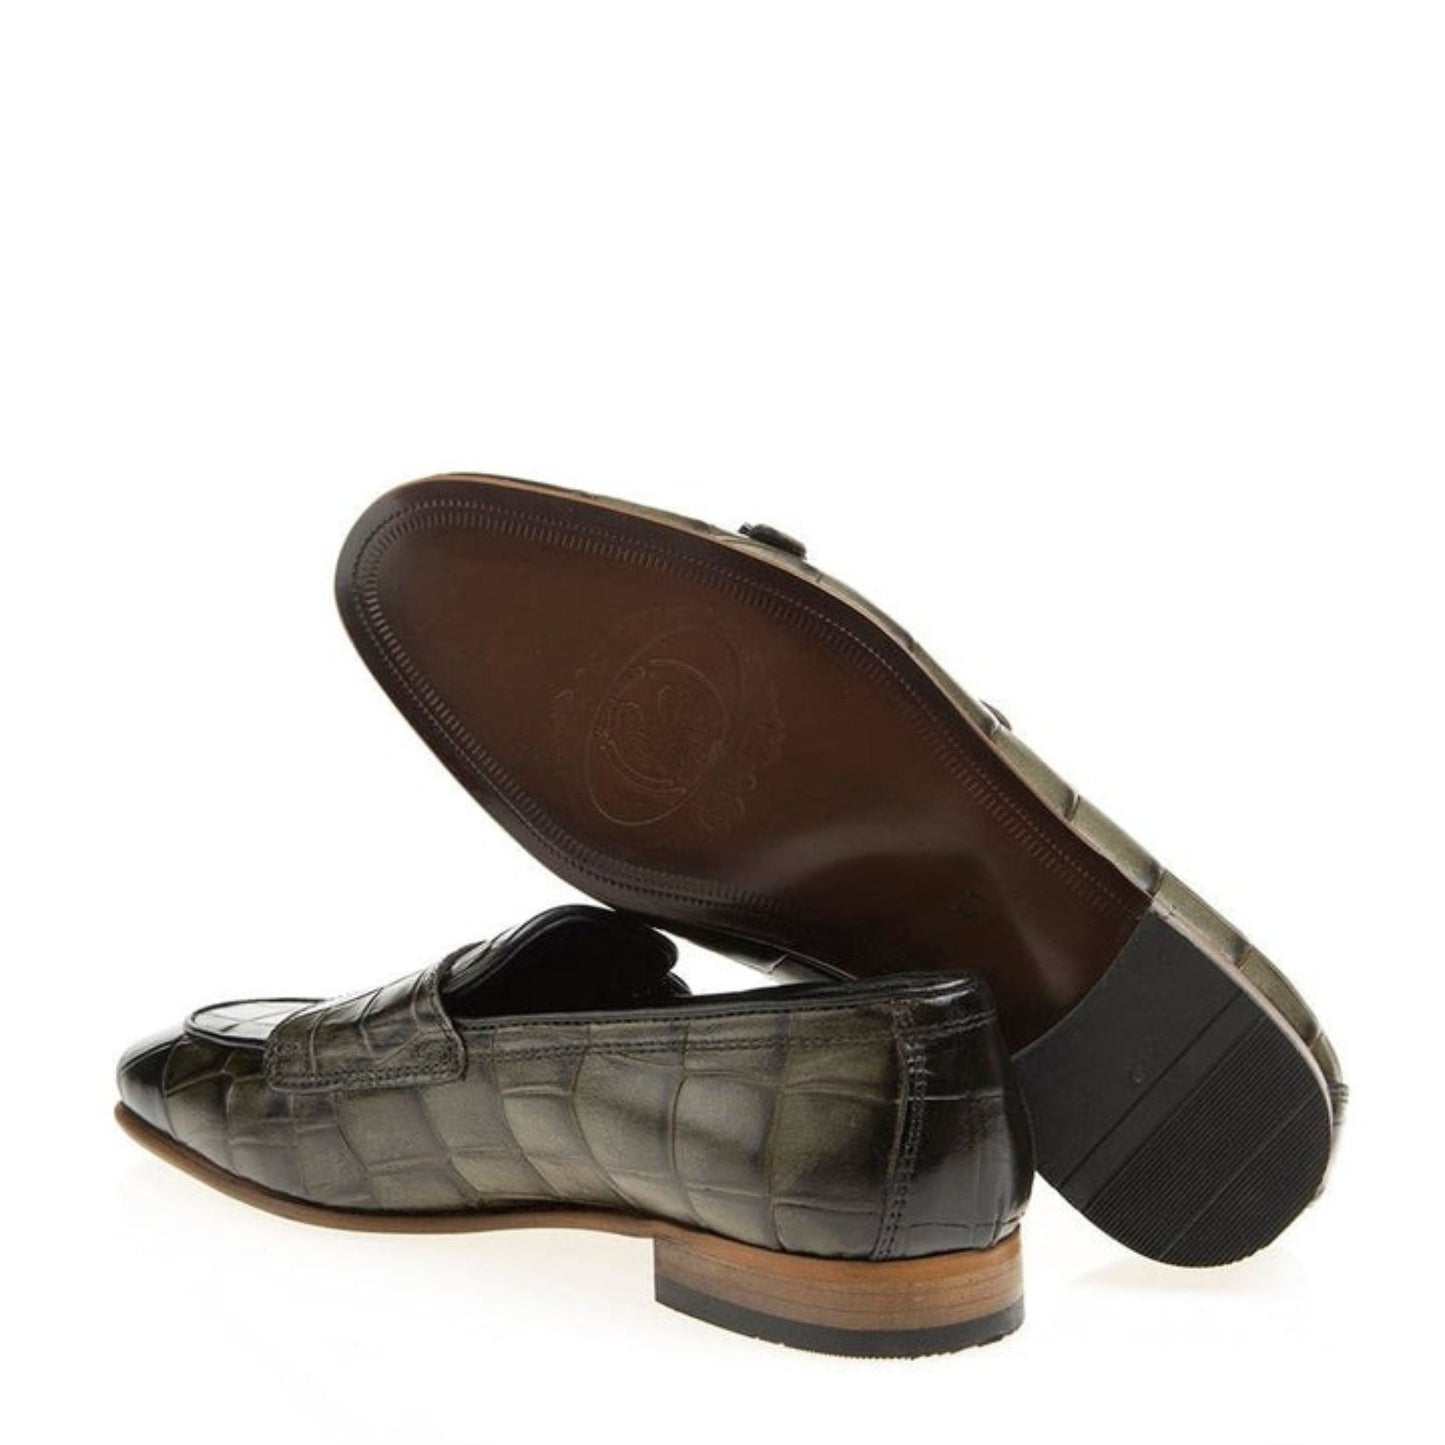 Madasat Green Leather Loafer - 703 |